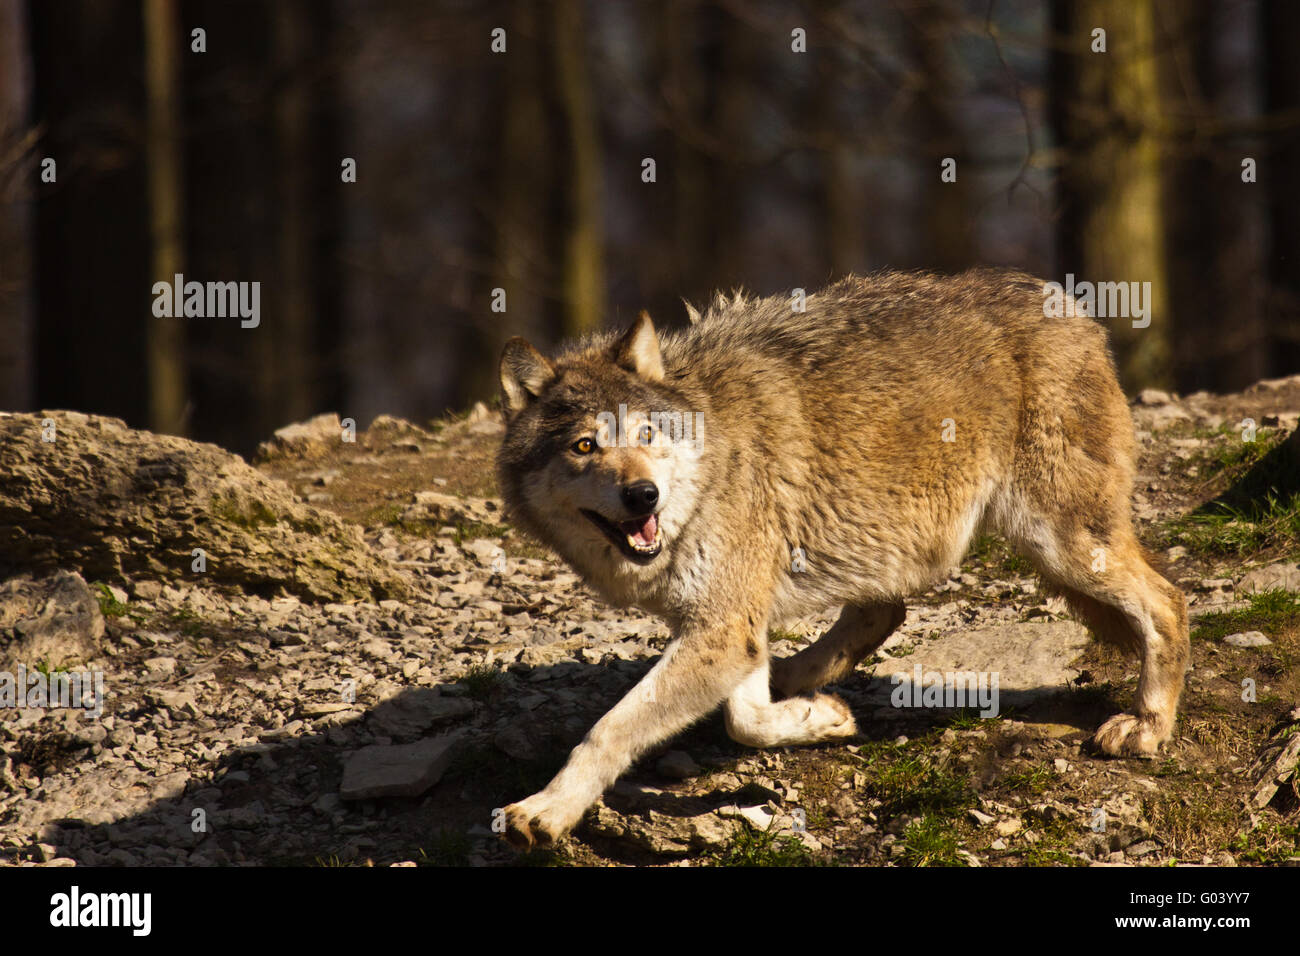 Eastern Wolf or american grey wolf (Canis lupus) Stock Photo